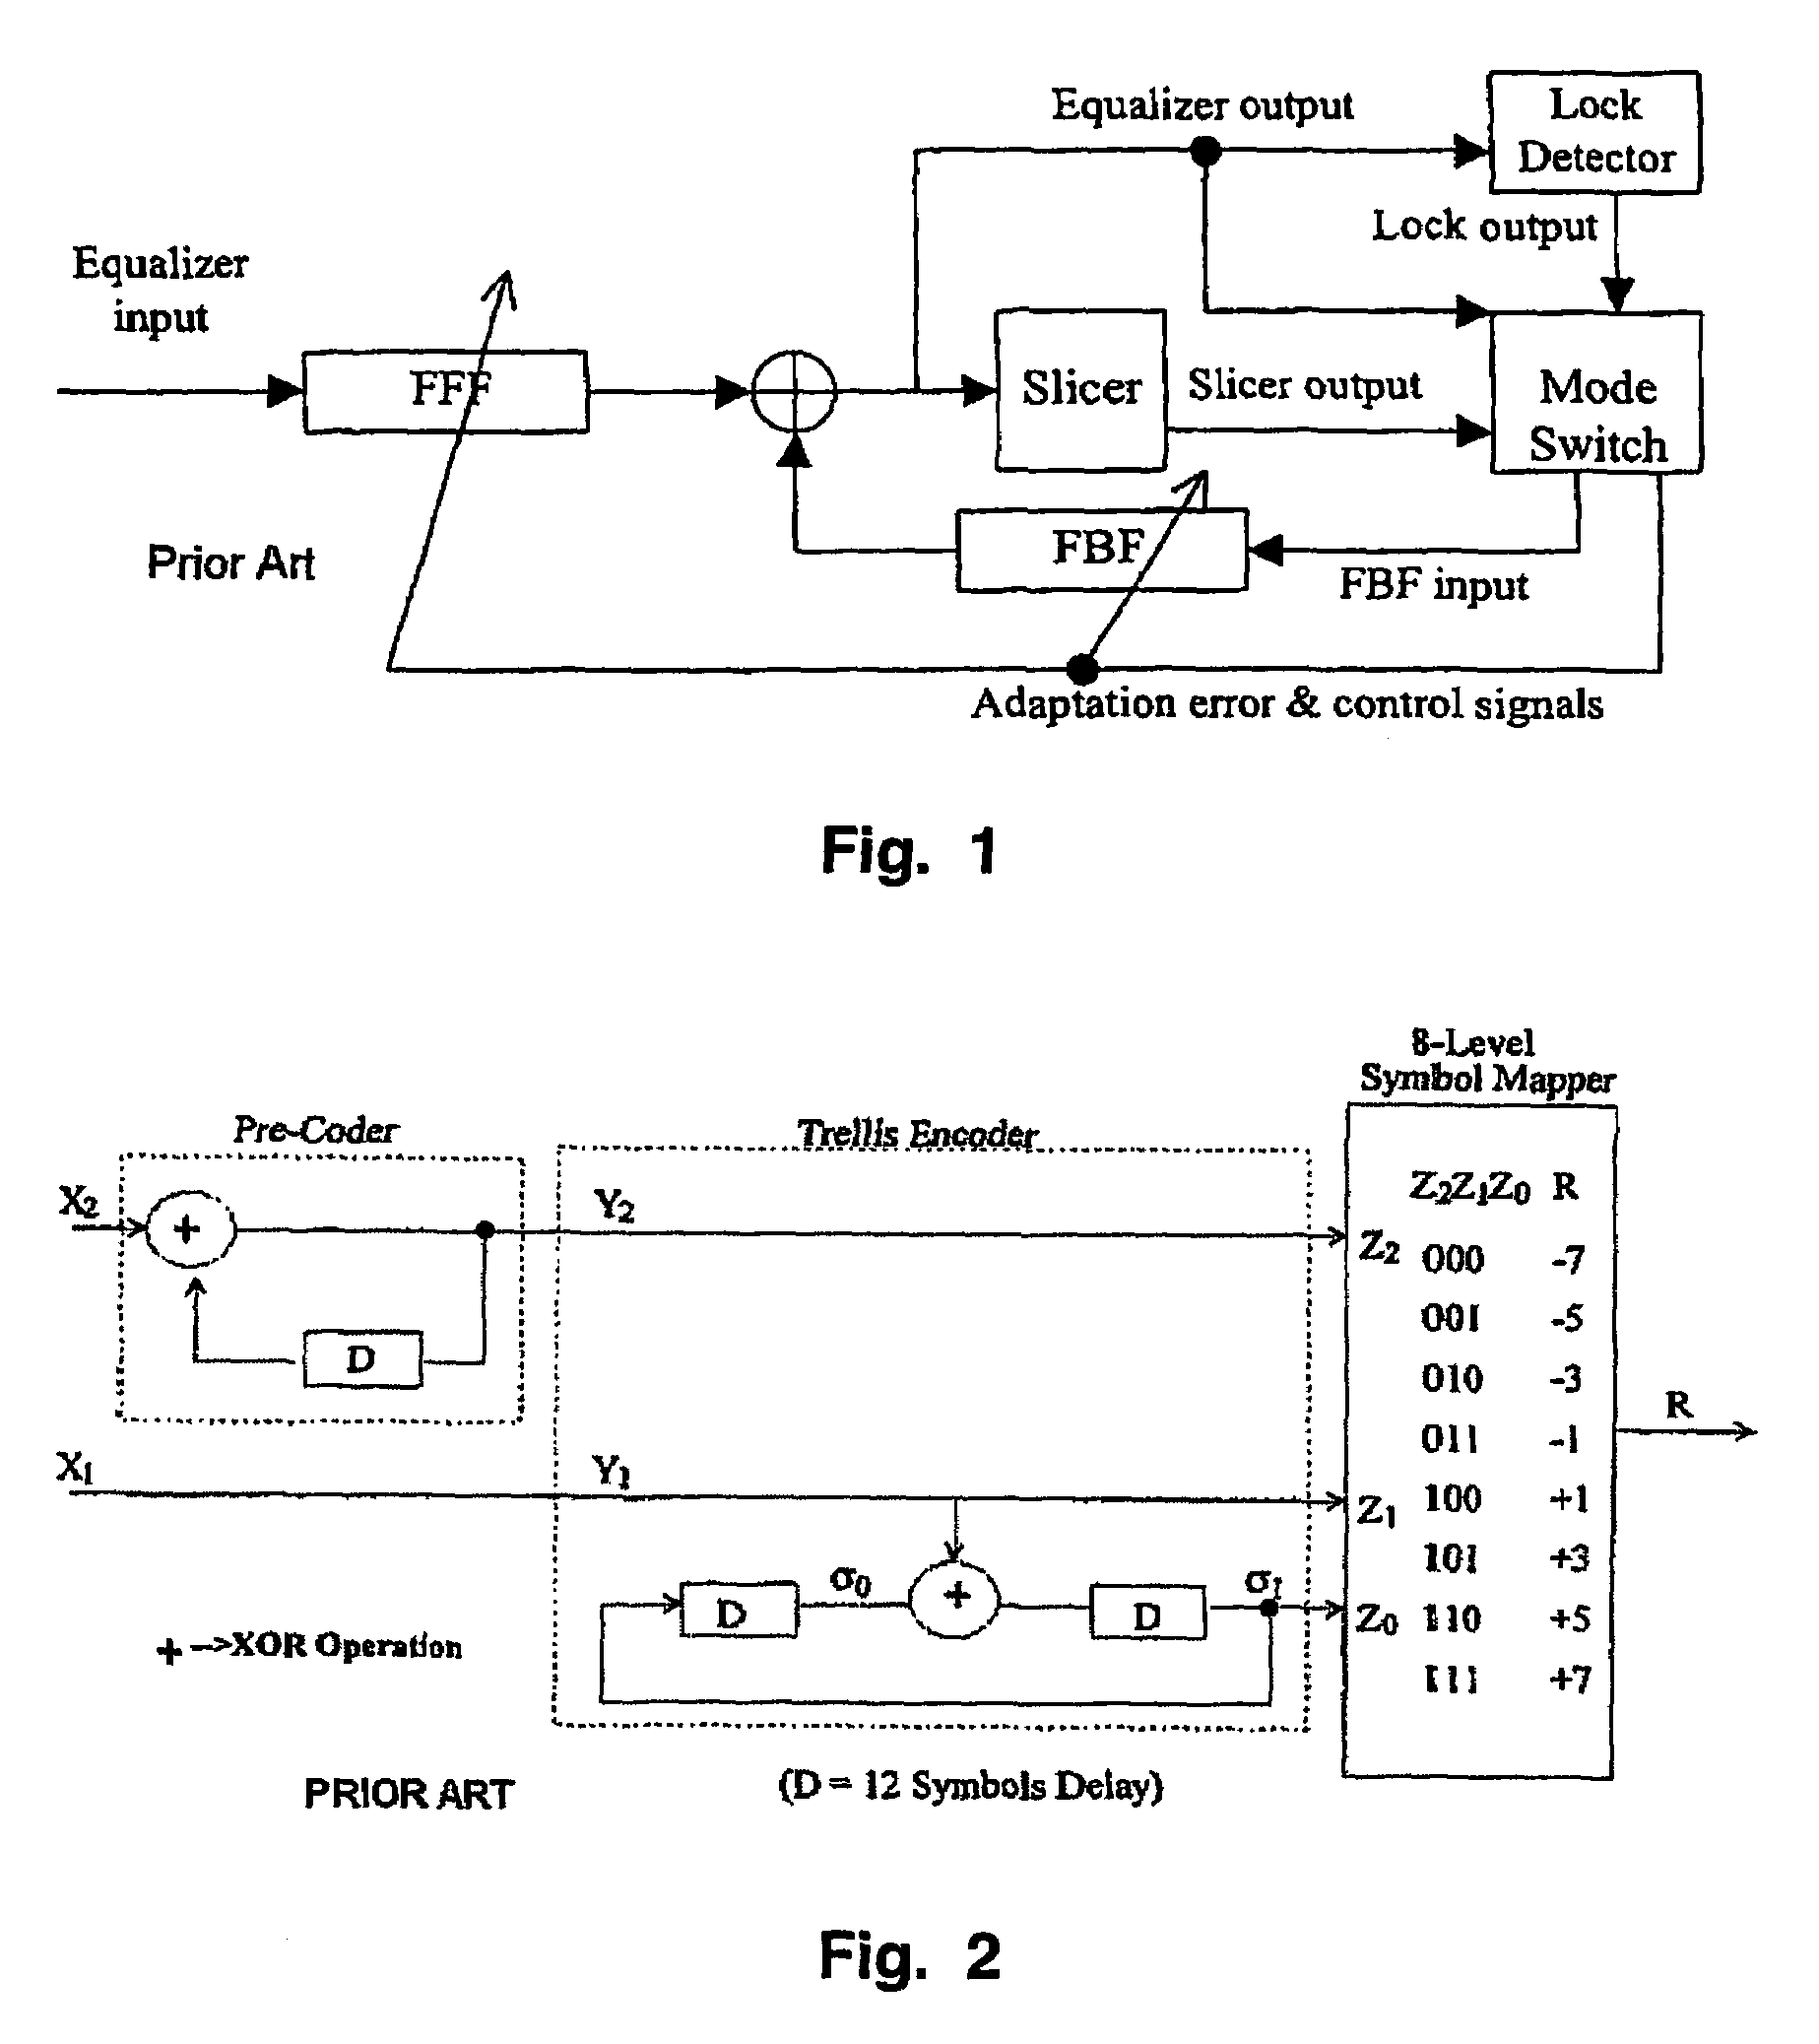 Concatenated equalizer/trellis decoder architecture for an HDTV receiver